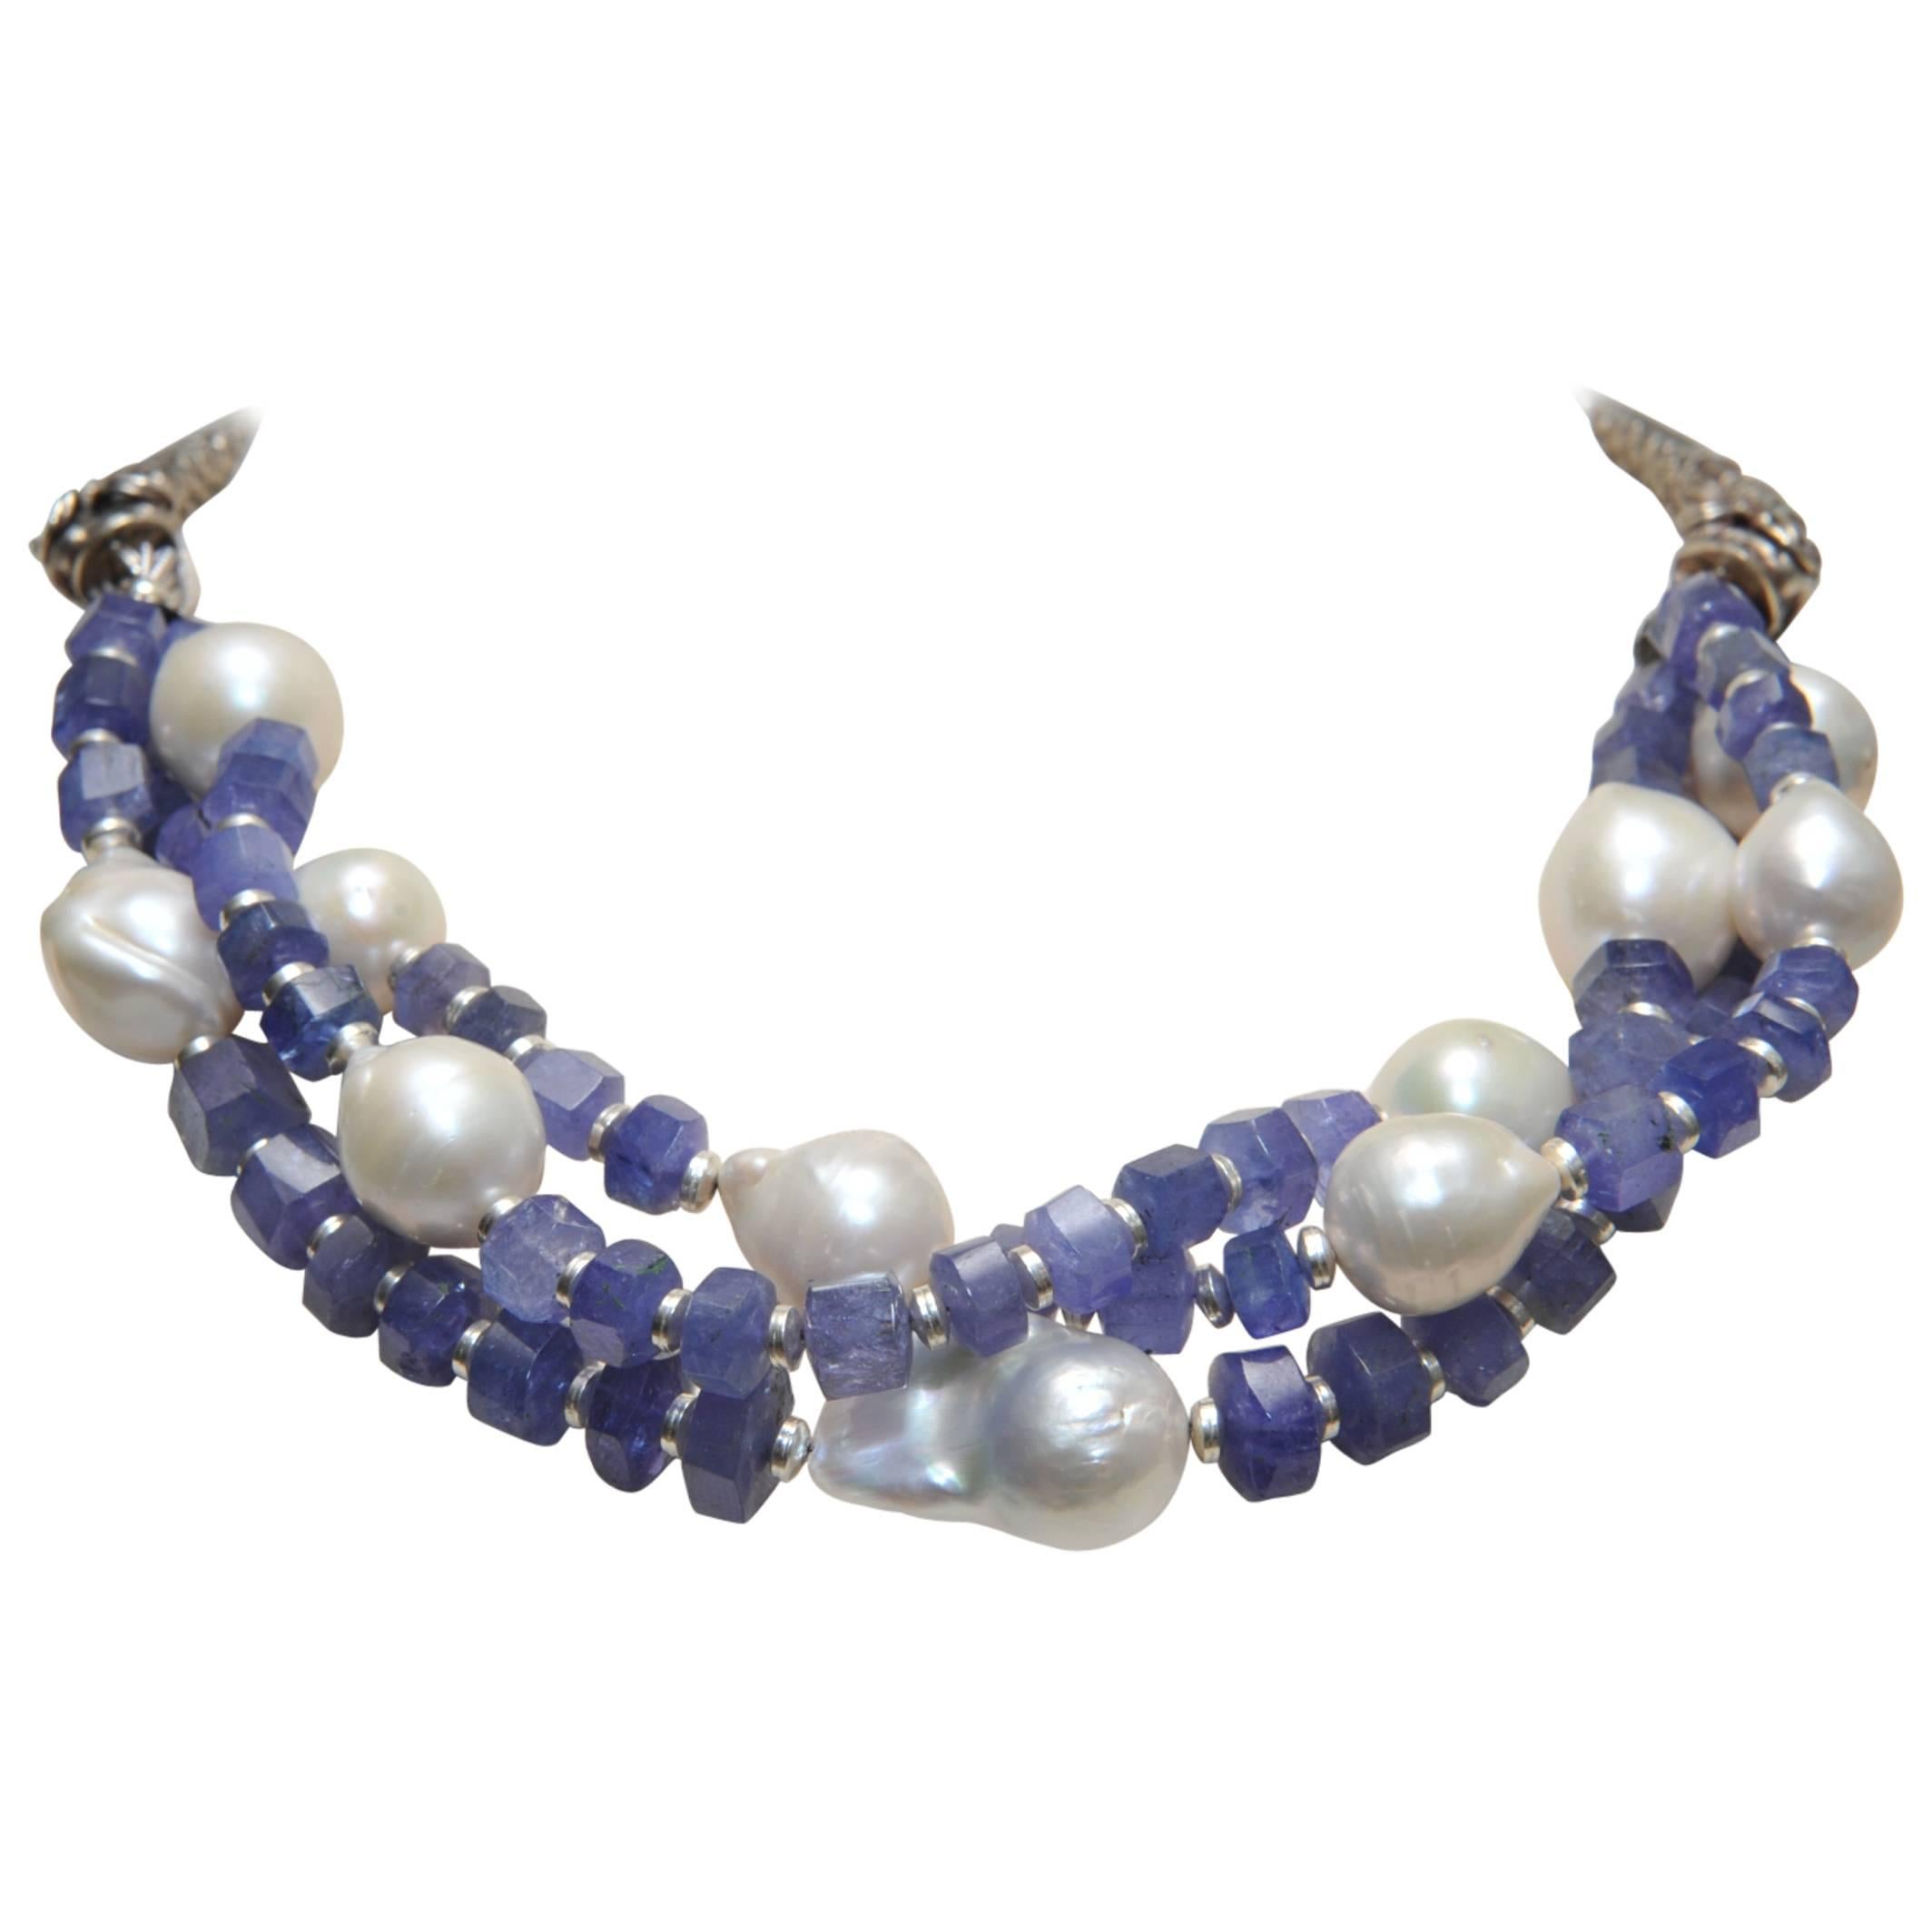 Triple Strands Necklace of Tanzanite, Baroque Pearl and Sterling Dragons